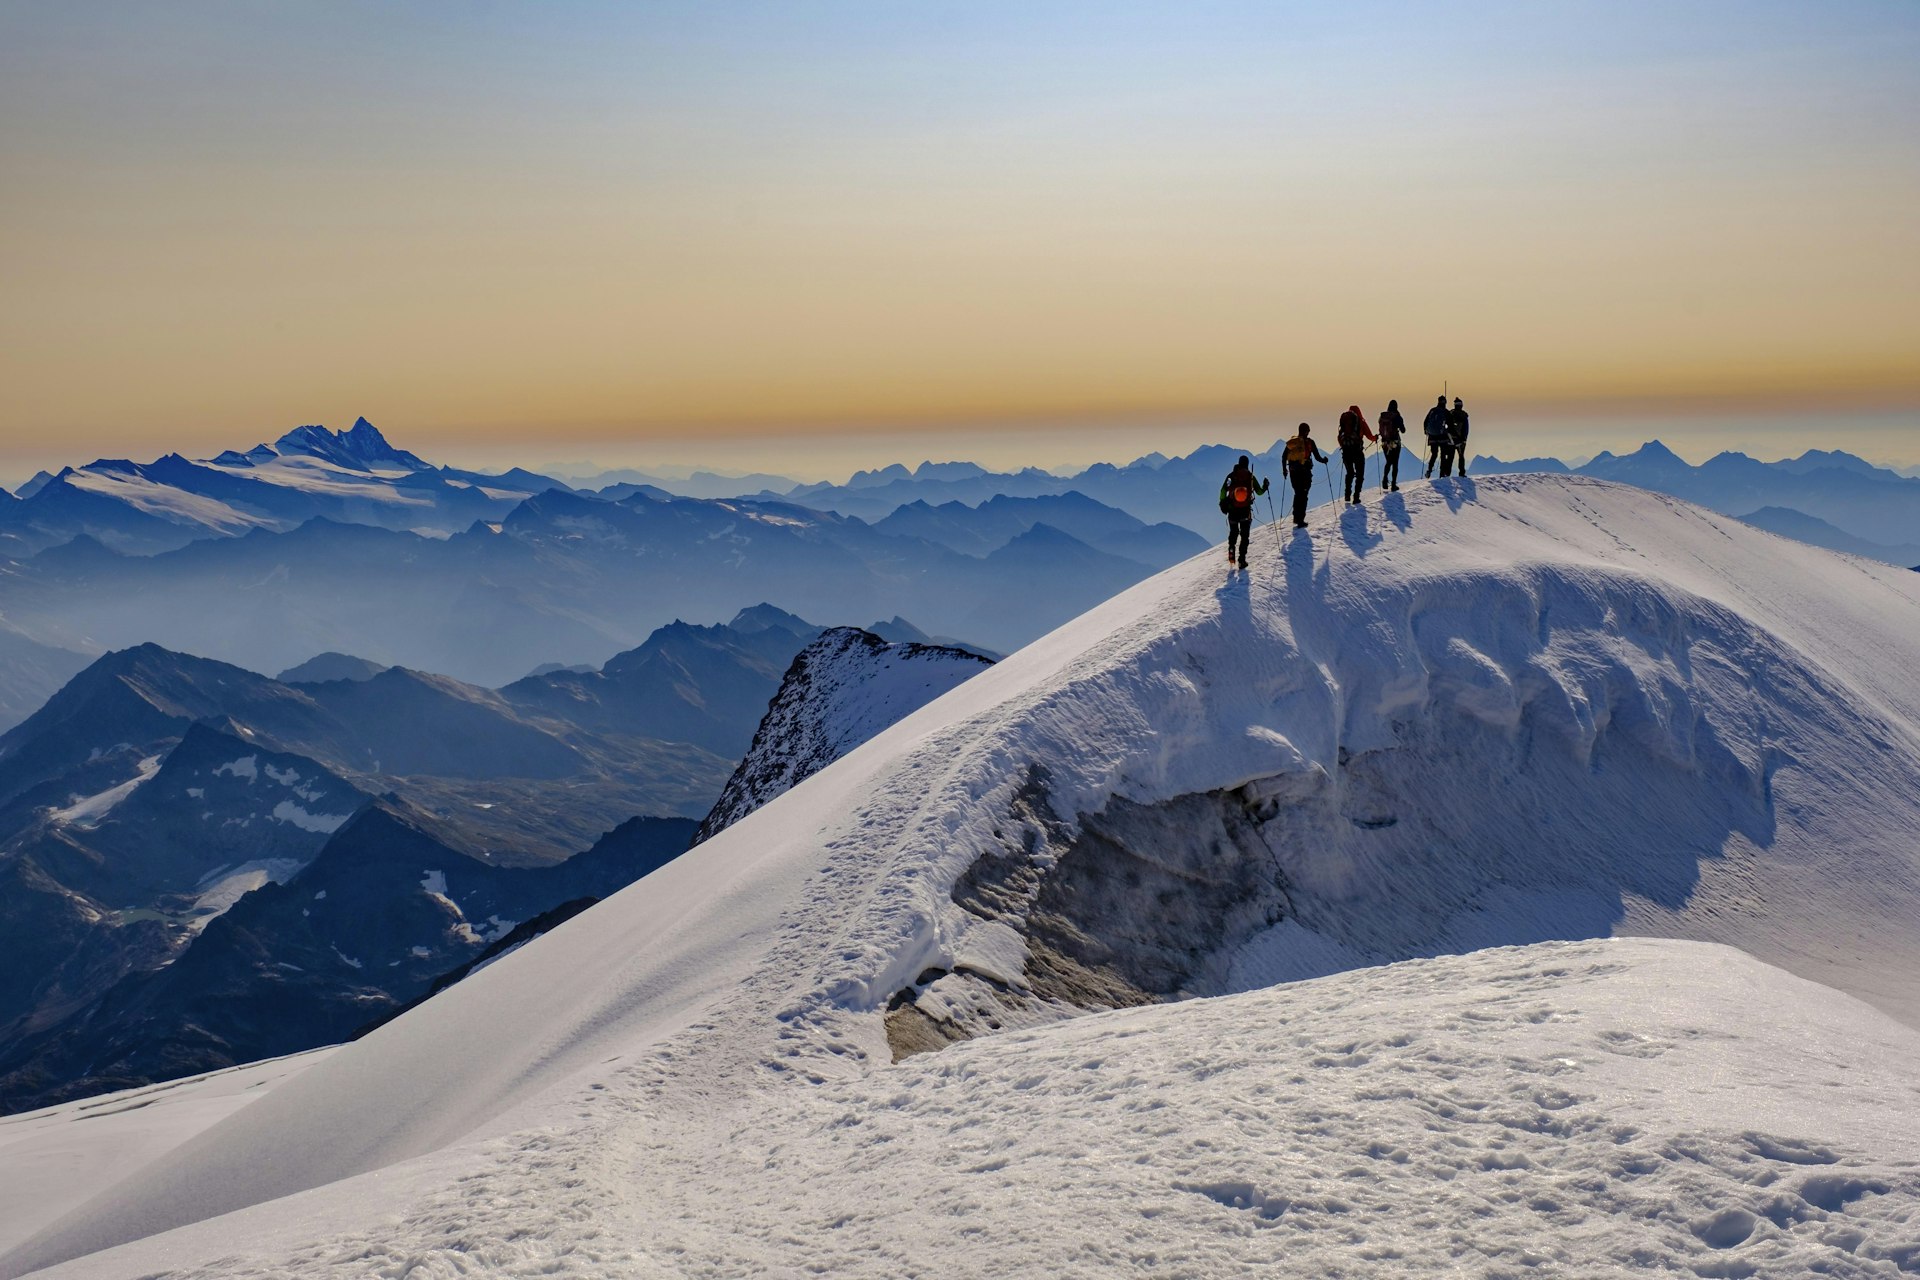 Mountaineers on snowy summit in Hone Tauern National Park